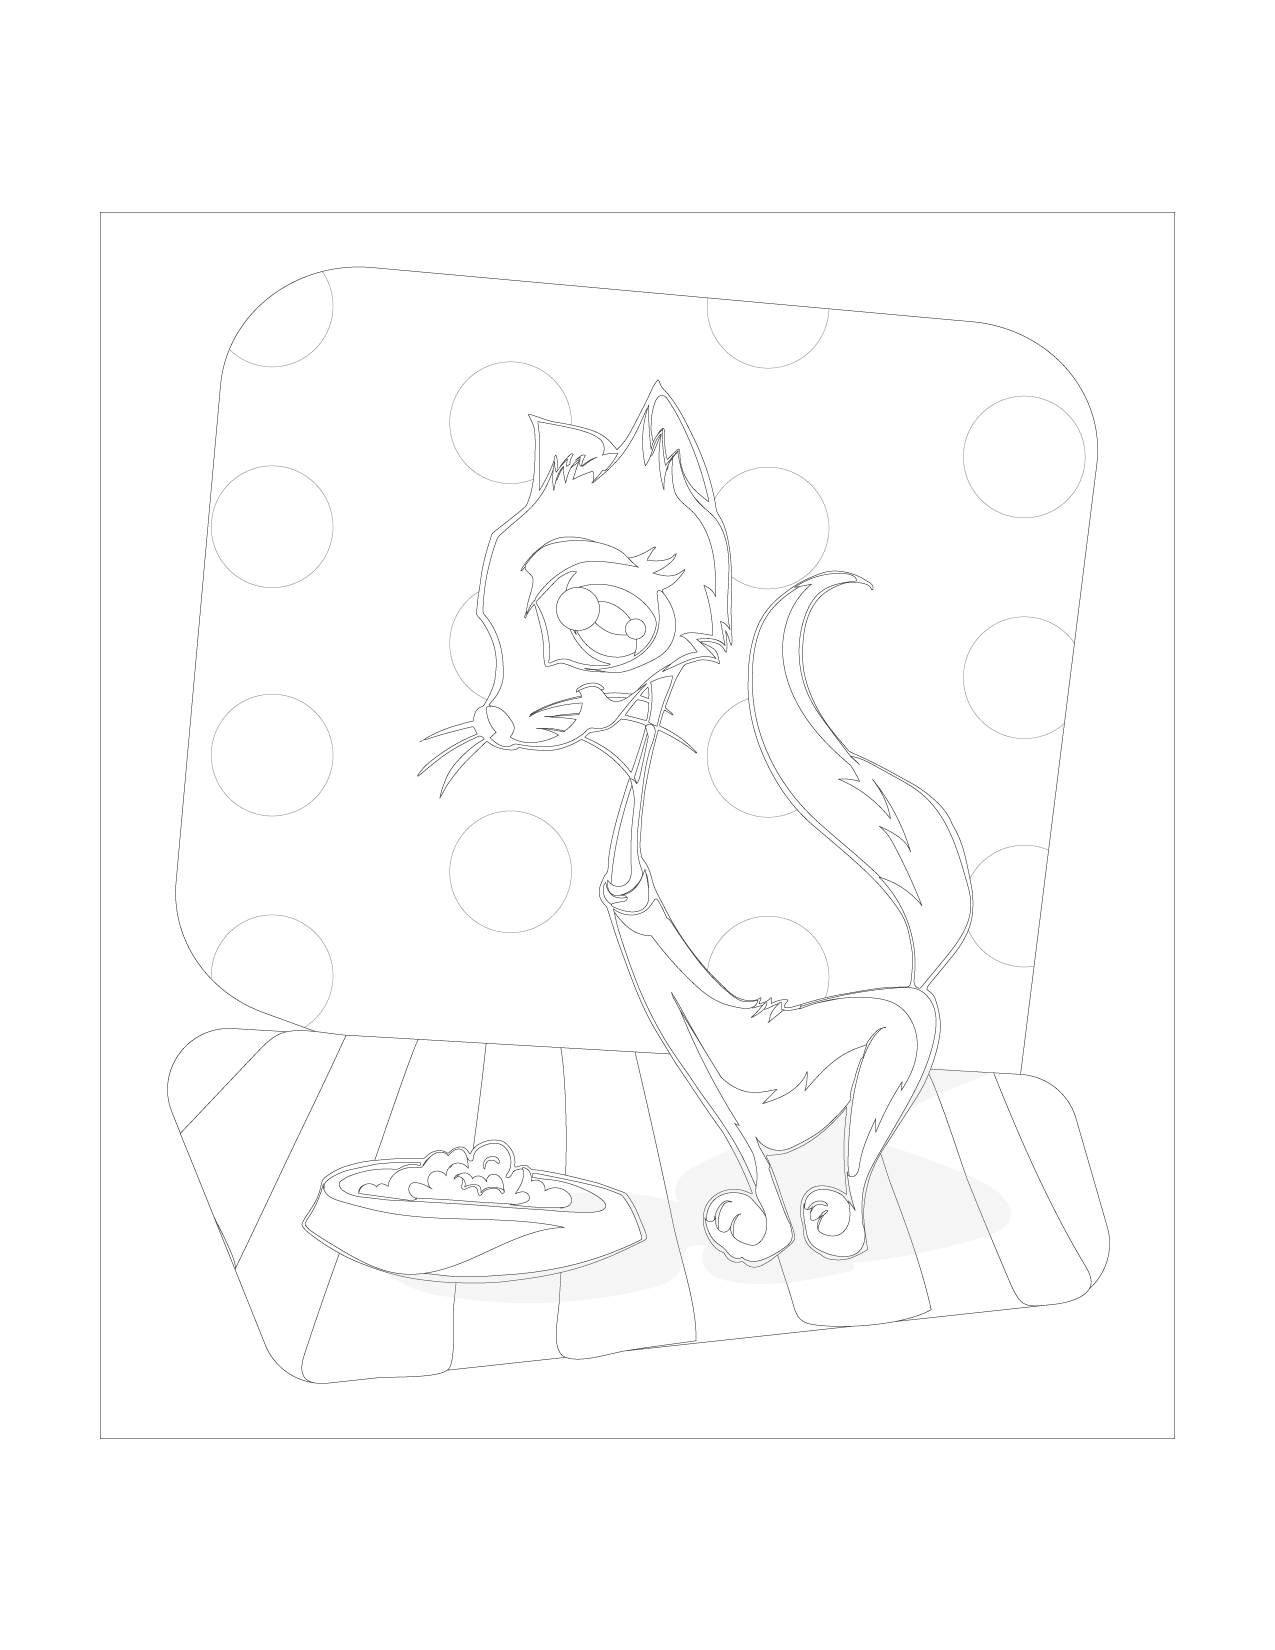 Cats Breakfast Coloring Page